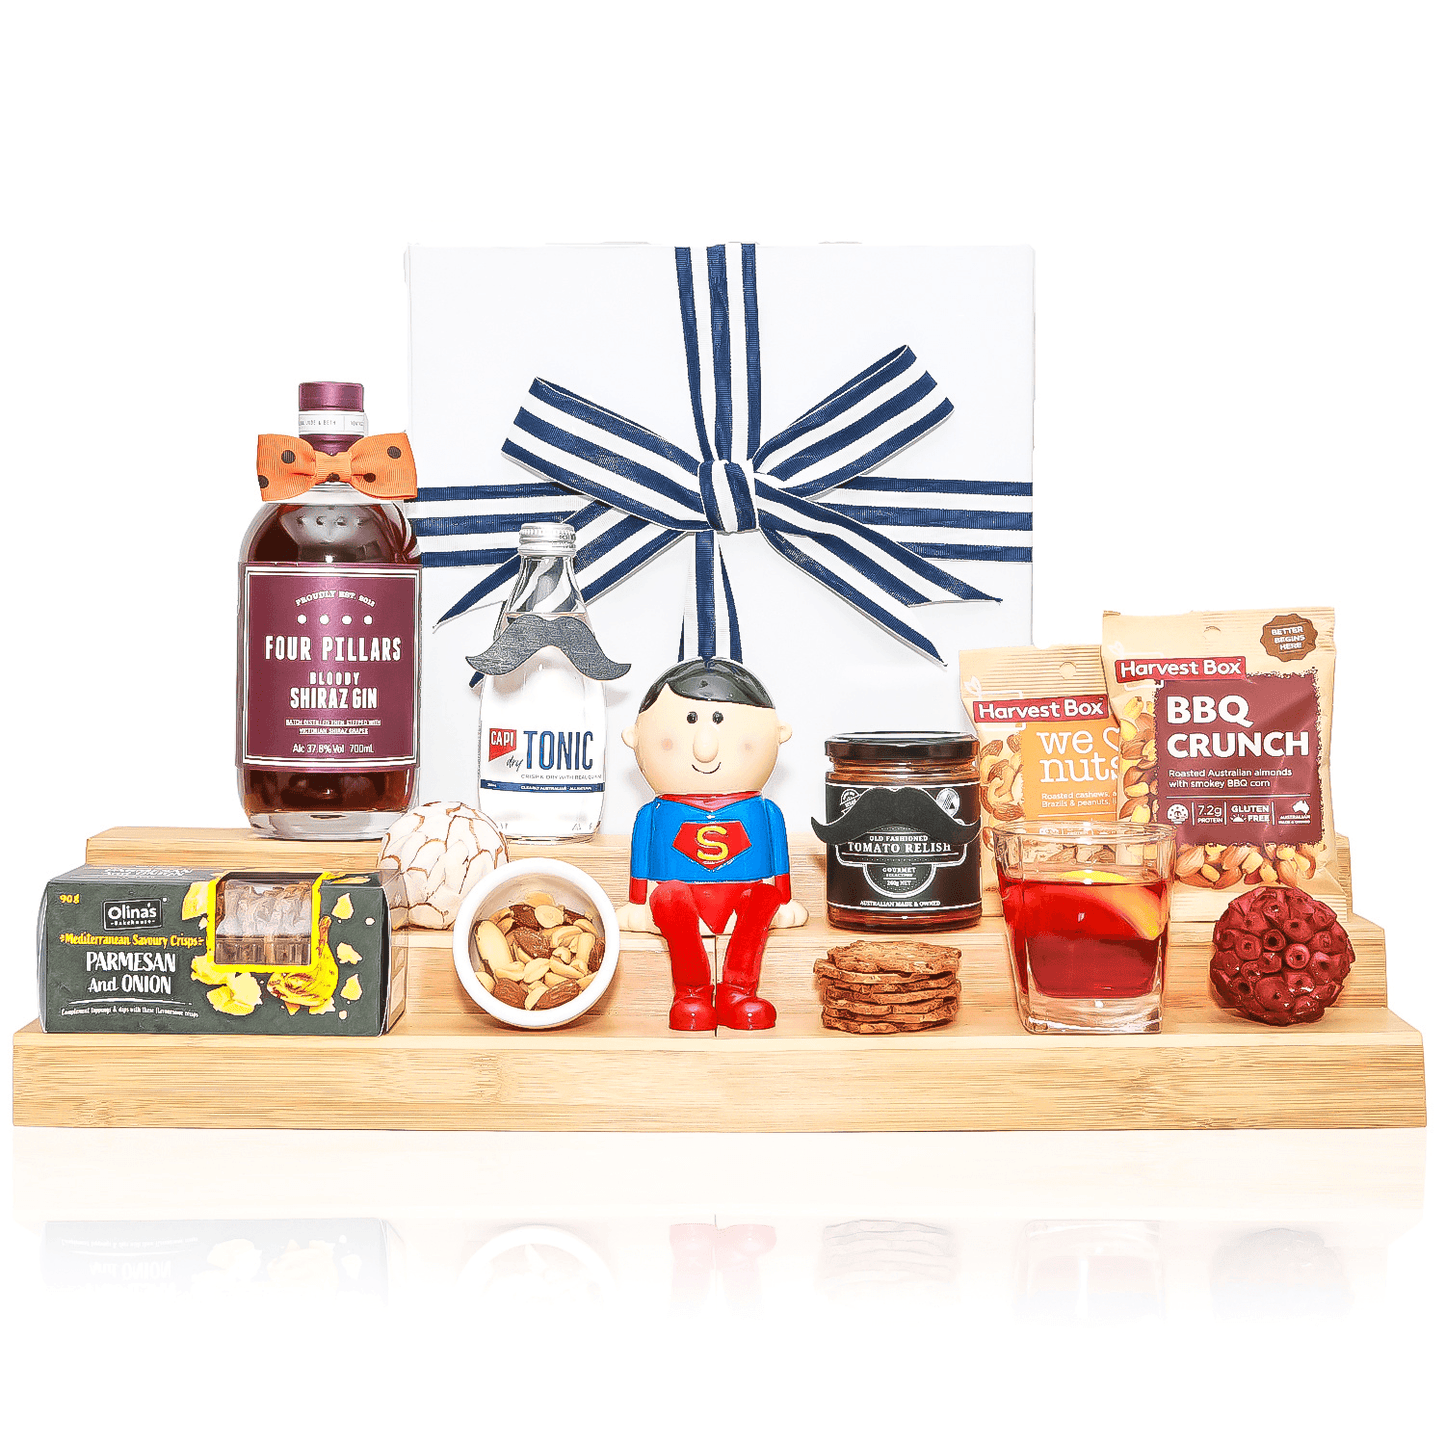 Fathers Day Gin Hamper - Healthy Belly Hampers - pure indulgence - birthday hampers - gift hampers - gift hampers melbourne - gift hampers australia - organic hampers -vegan hampers - gluten free hampers - birthday hampers -anniversary hampers - wedding hampers - alcohol hampers